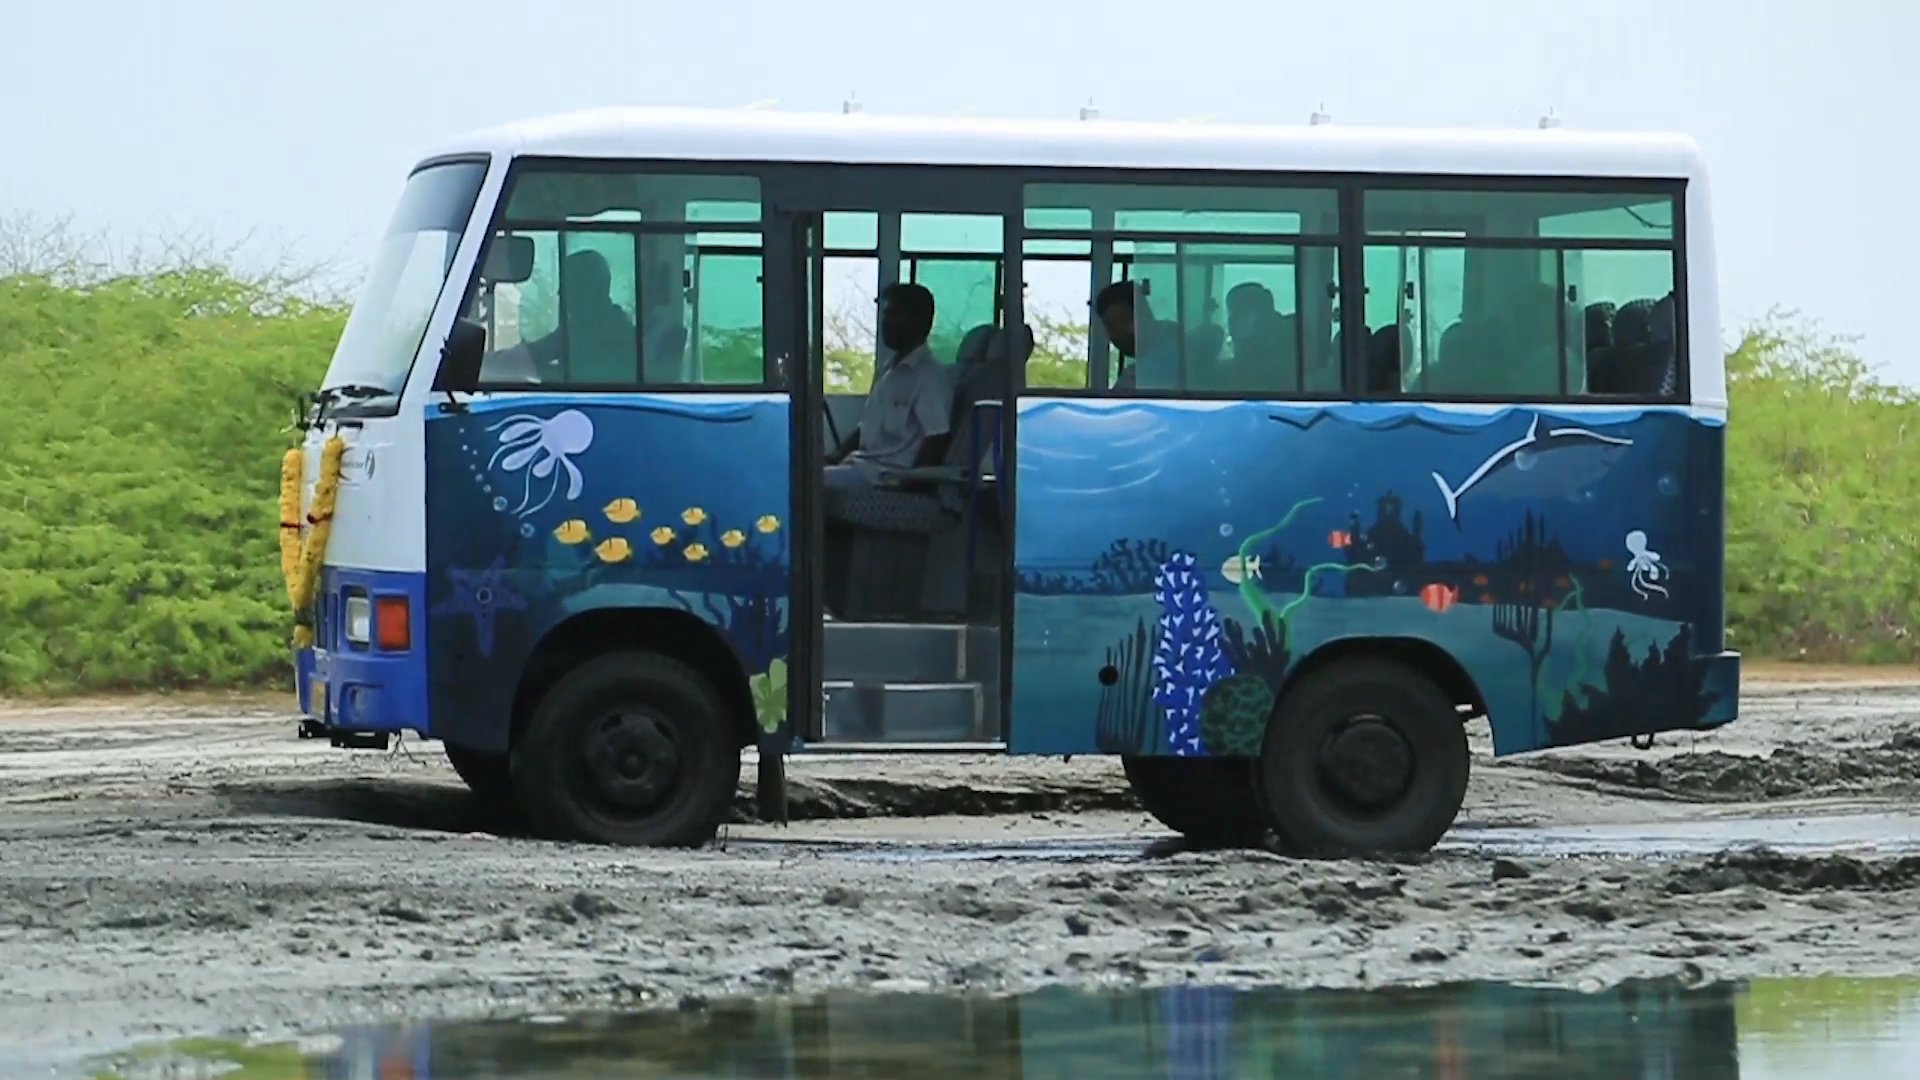 How Duo From Bangalore Helped An Abandoned Town Get A Bus Which Will Be A Lifeline For People Living There